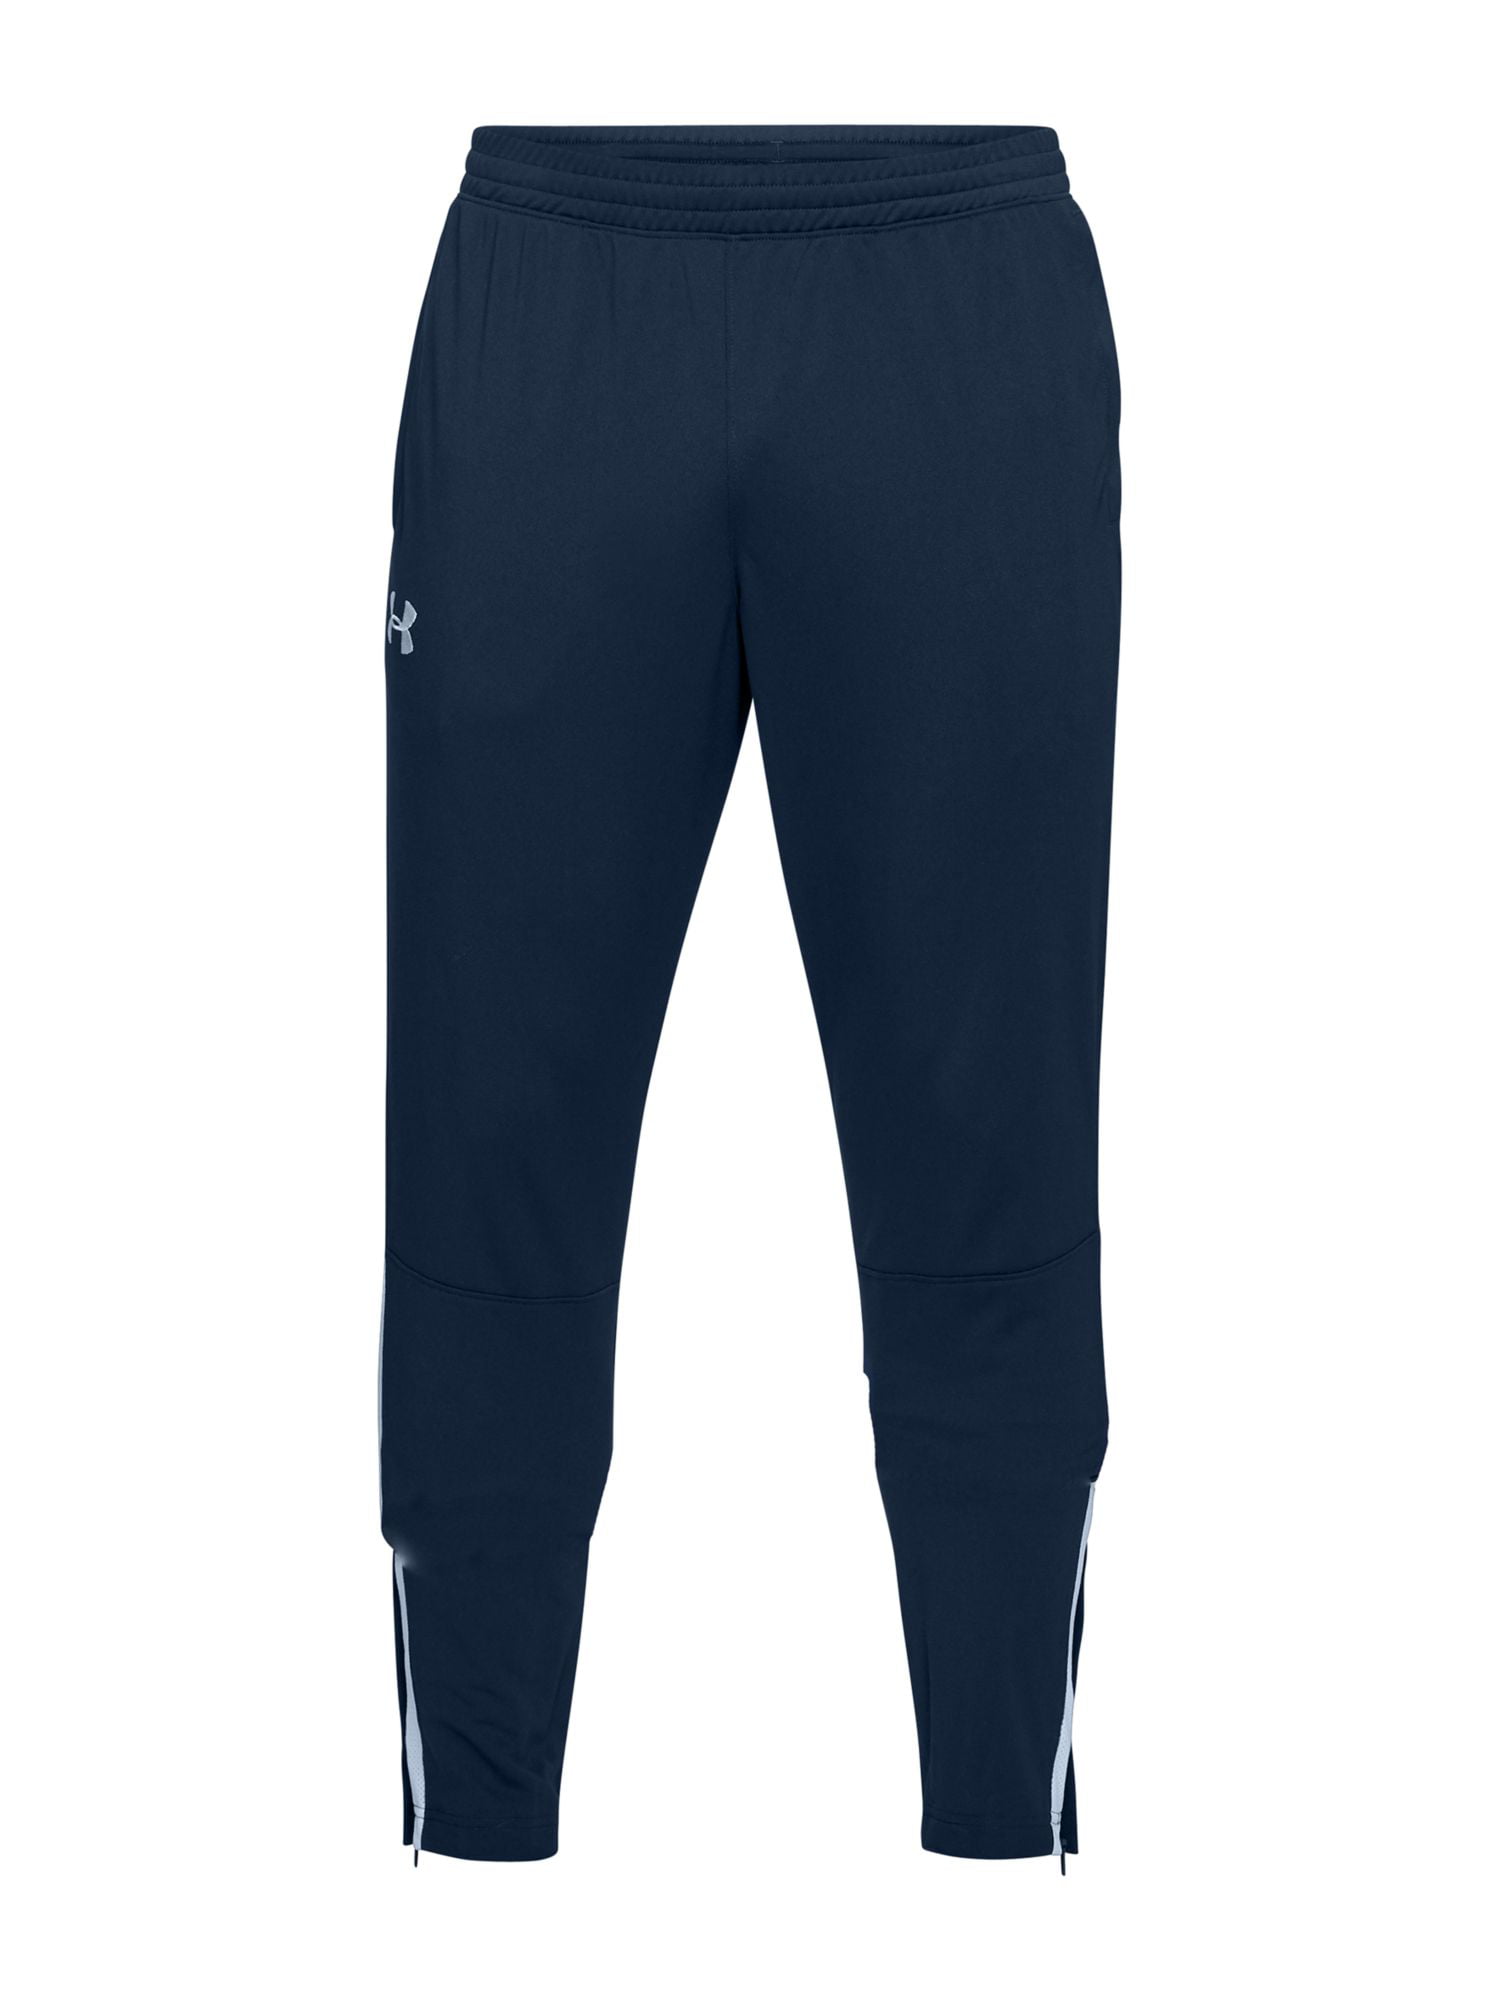 UNDER ARMOUR Mens Navy Stretch, Pants Graphic XXLT Wicking Logo Tapered, Moisture